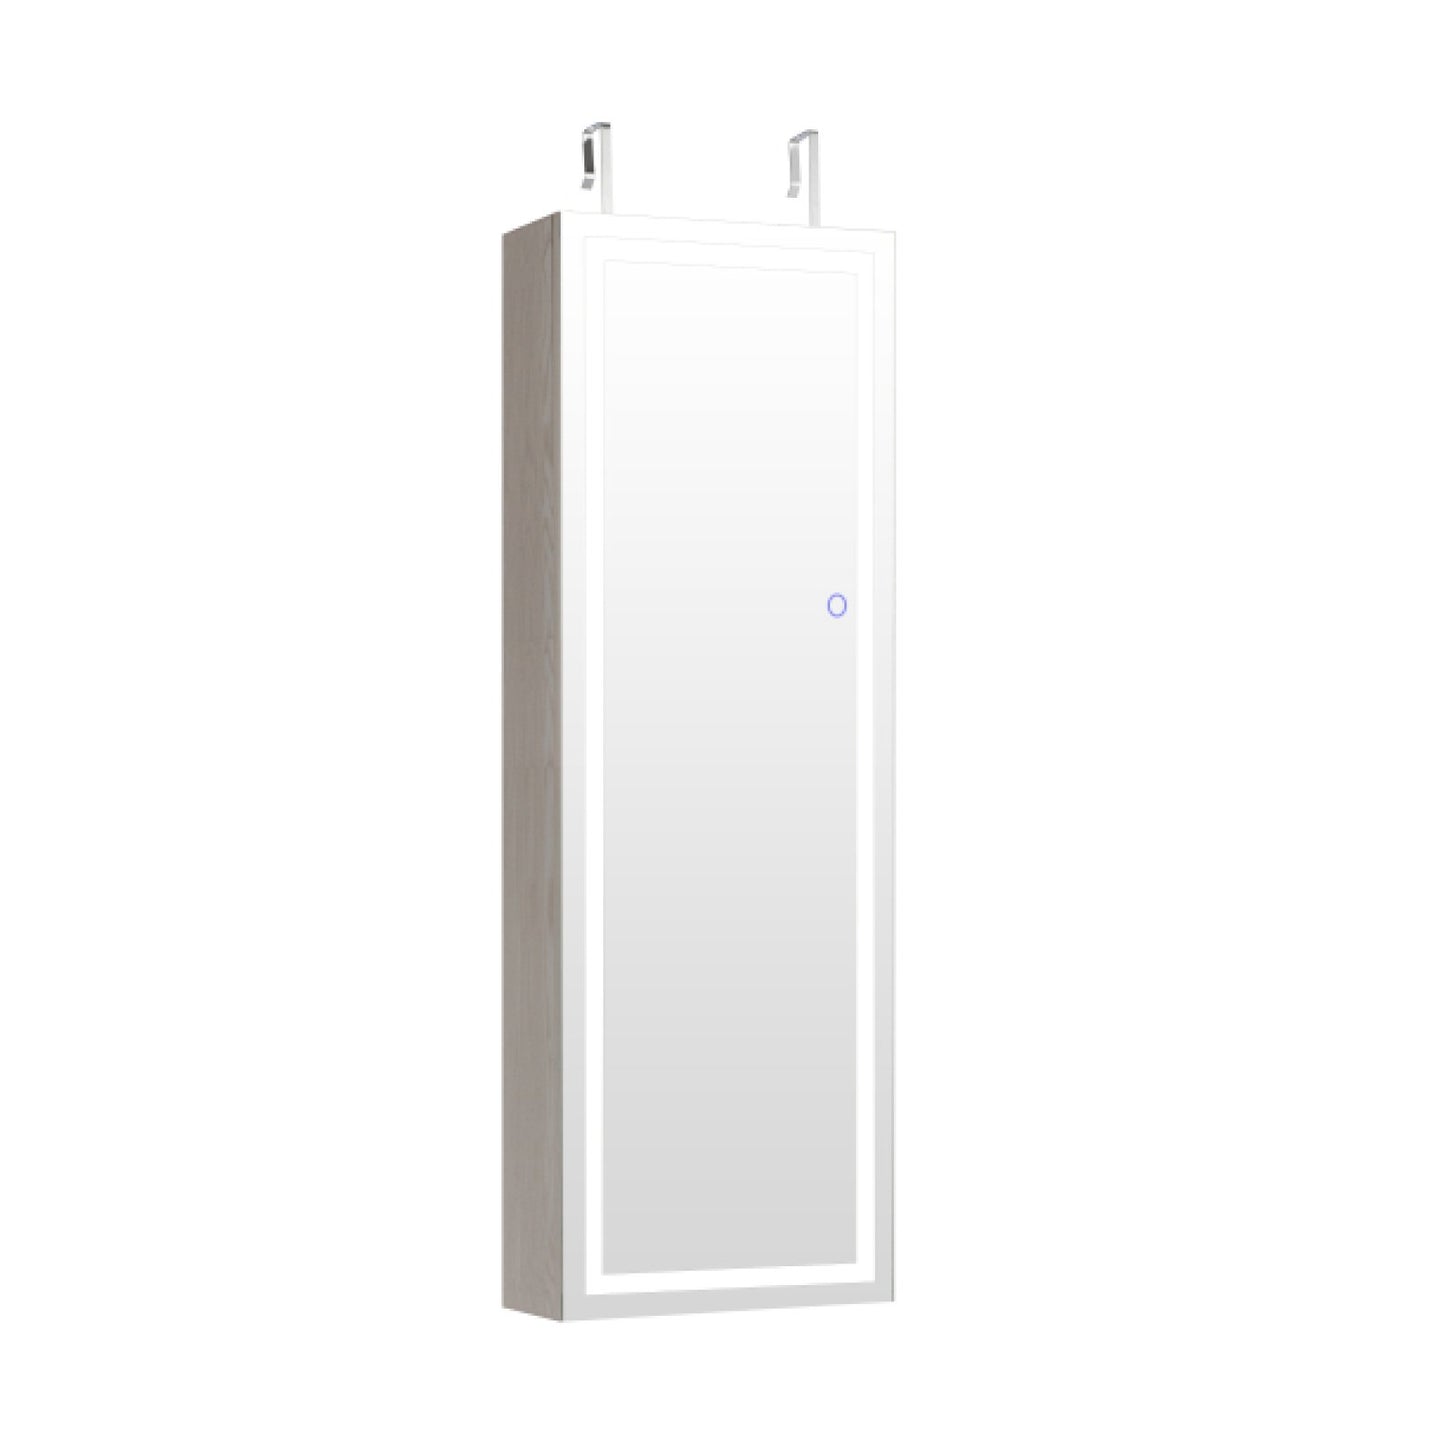 Mirrored Jewelry Armoire with Full Length Mirror and 2 Internal LED Lights, White